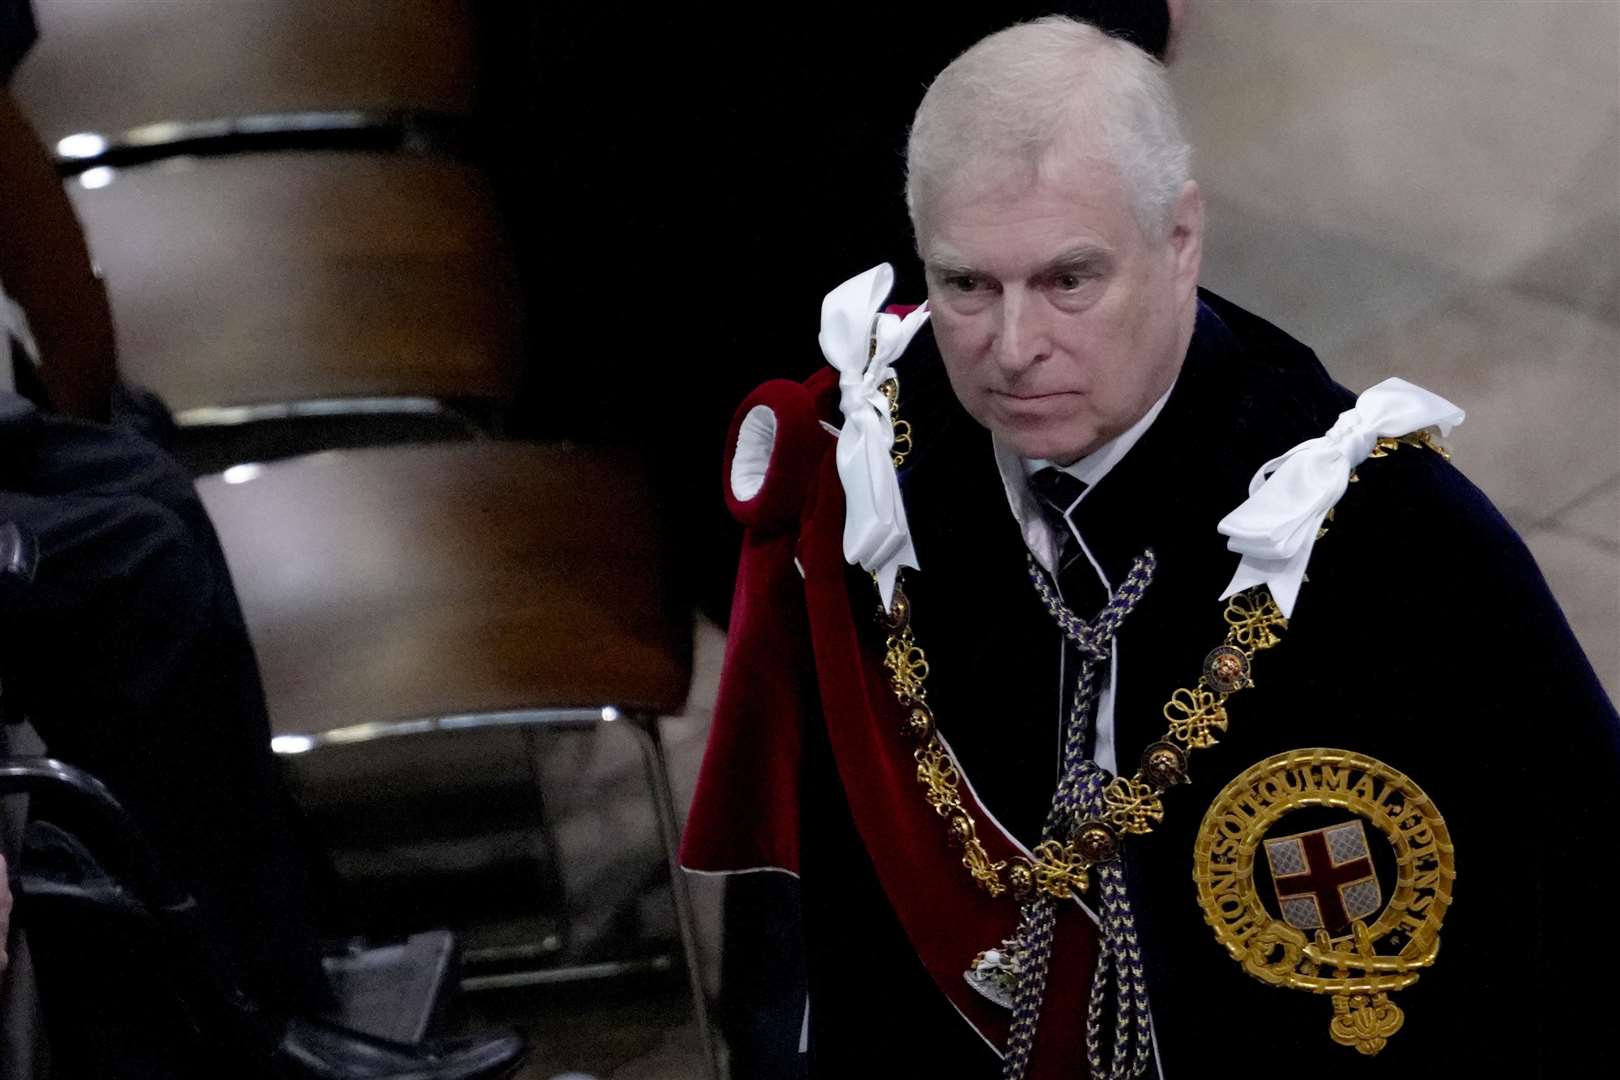 The Duke of York wearing his Garter robes at the King’s coronation (Kirsty Wigglesworth/PA)